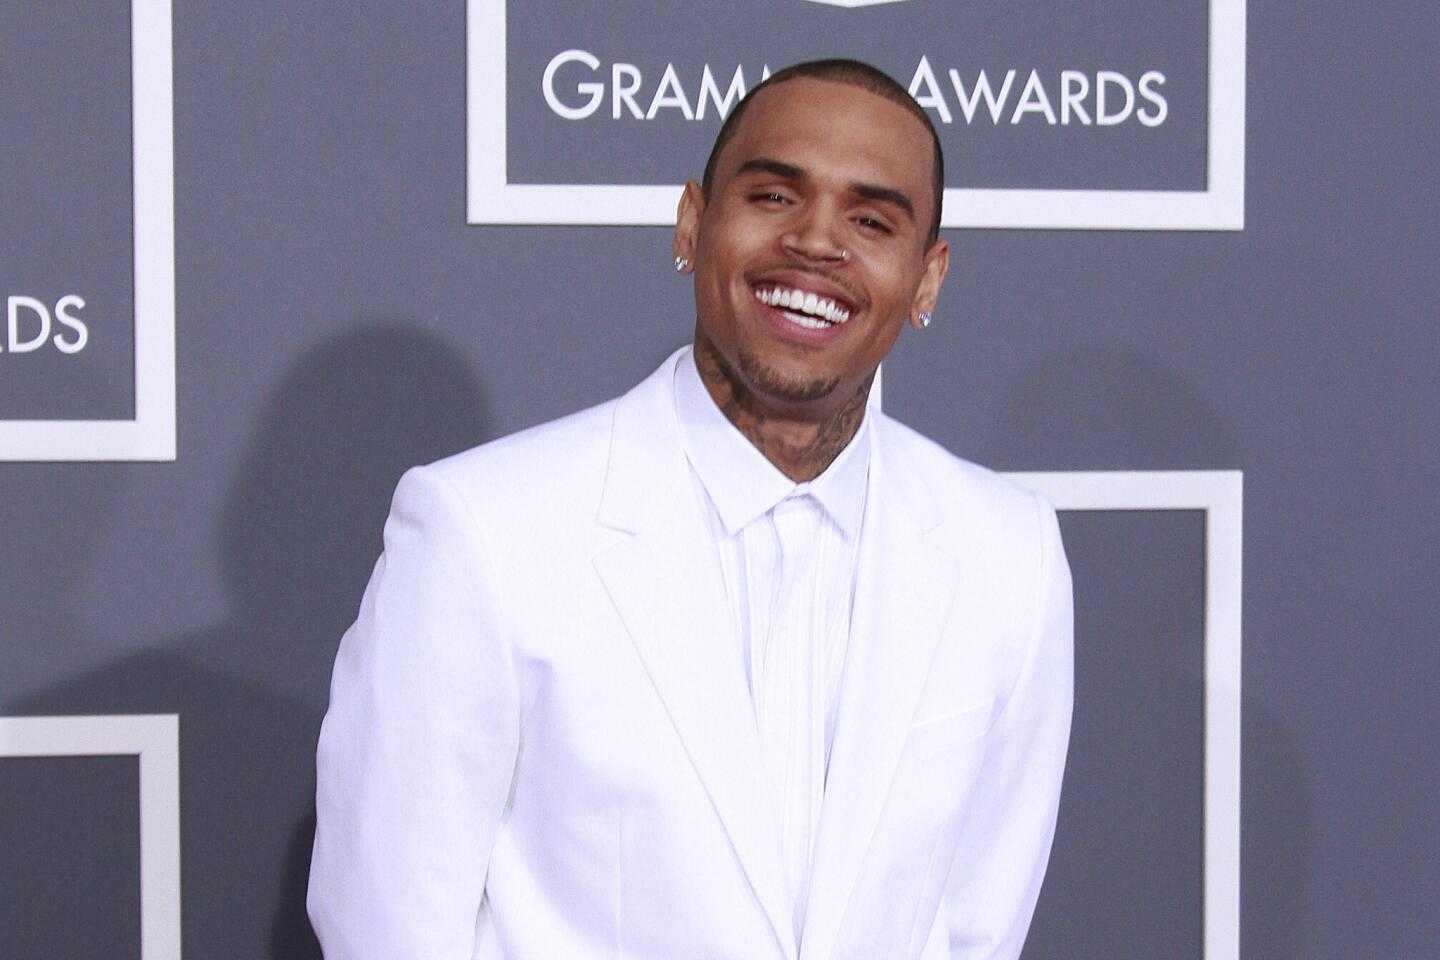 From stardom to scandal: Chris Brown's controversial journey revisited